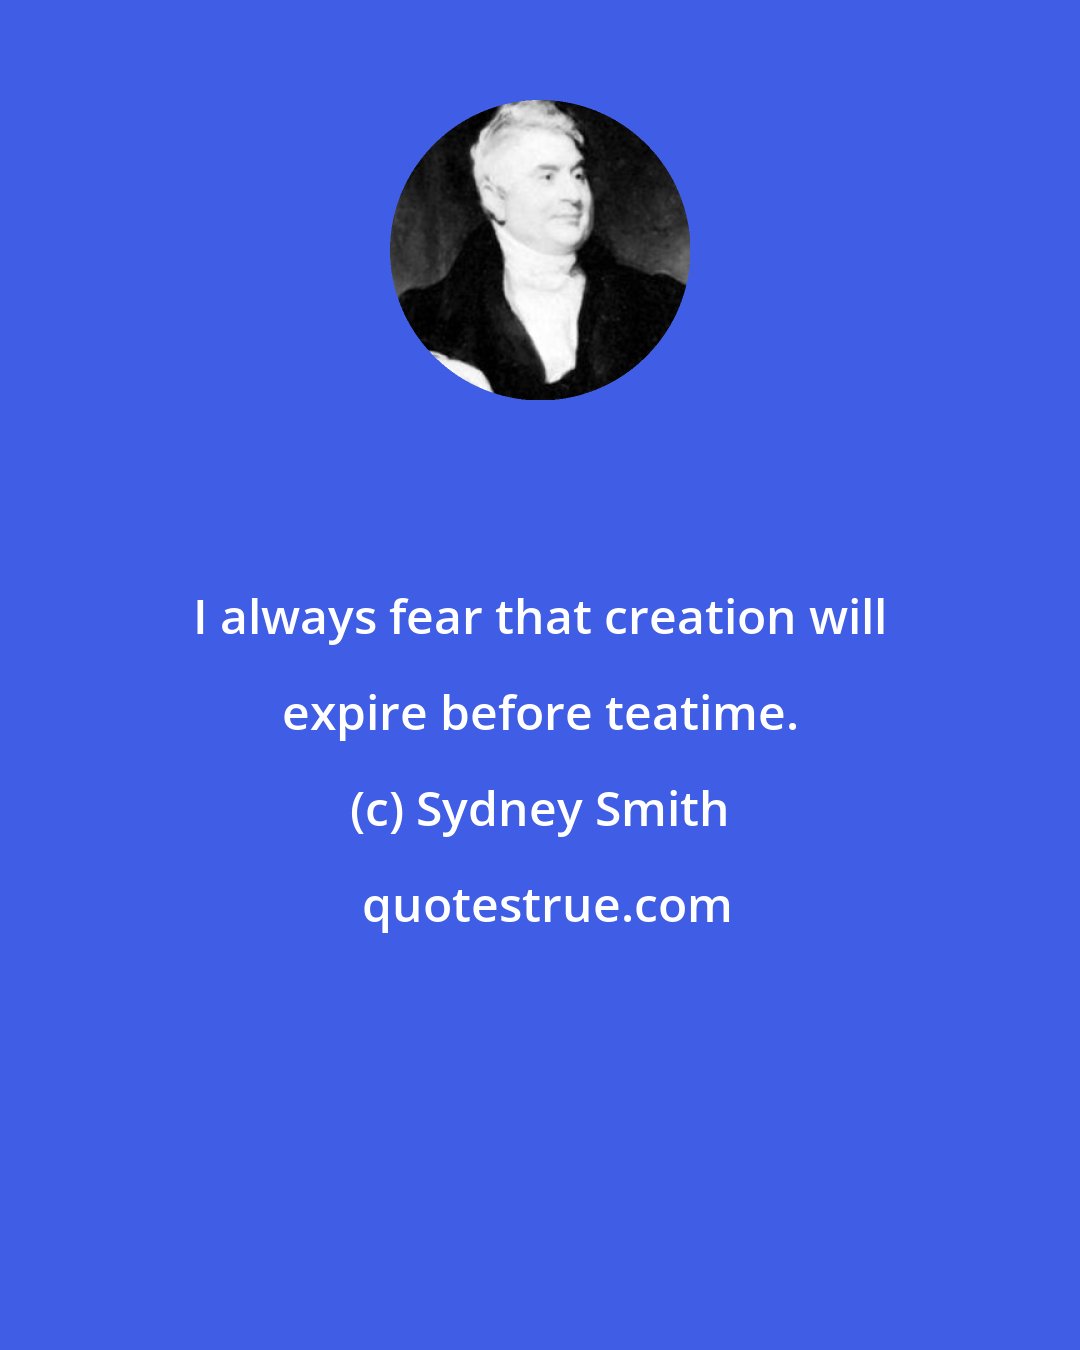 Sydney Smith: I always fear that creation will expire before teatime.